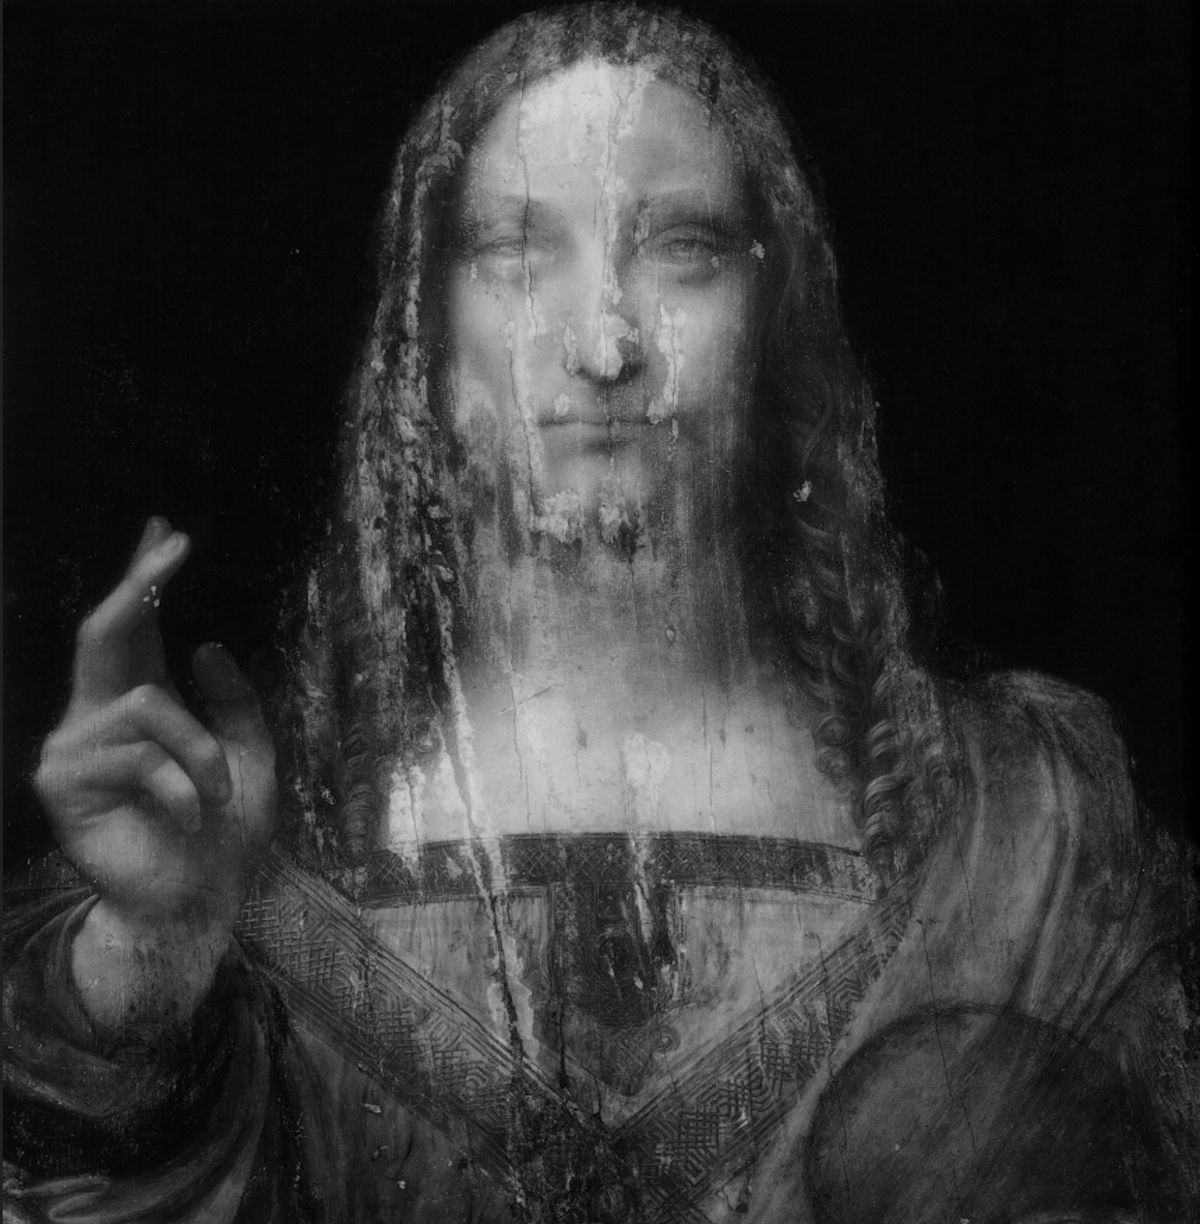 The back page of the book is the full-bleed of the infra-red reflectography of the Salvator Mundi 